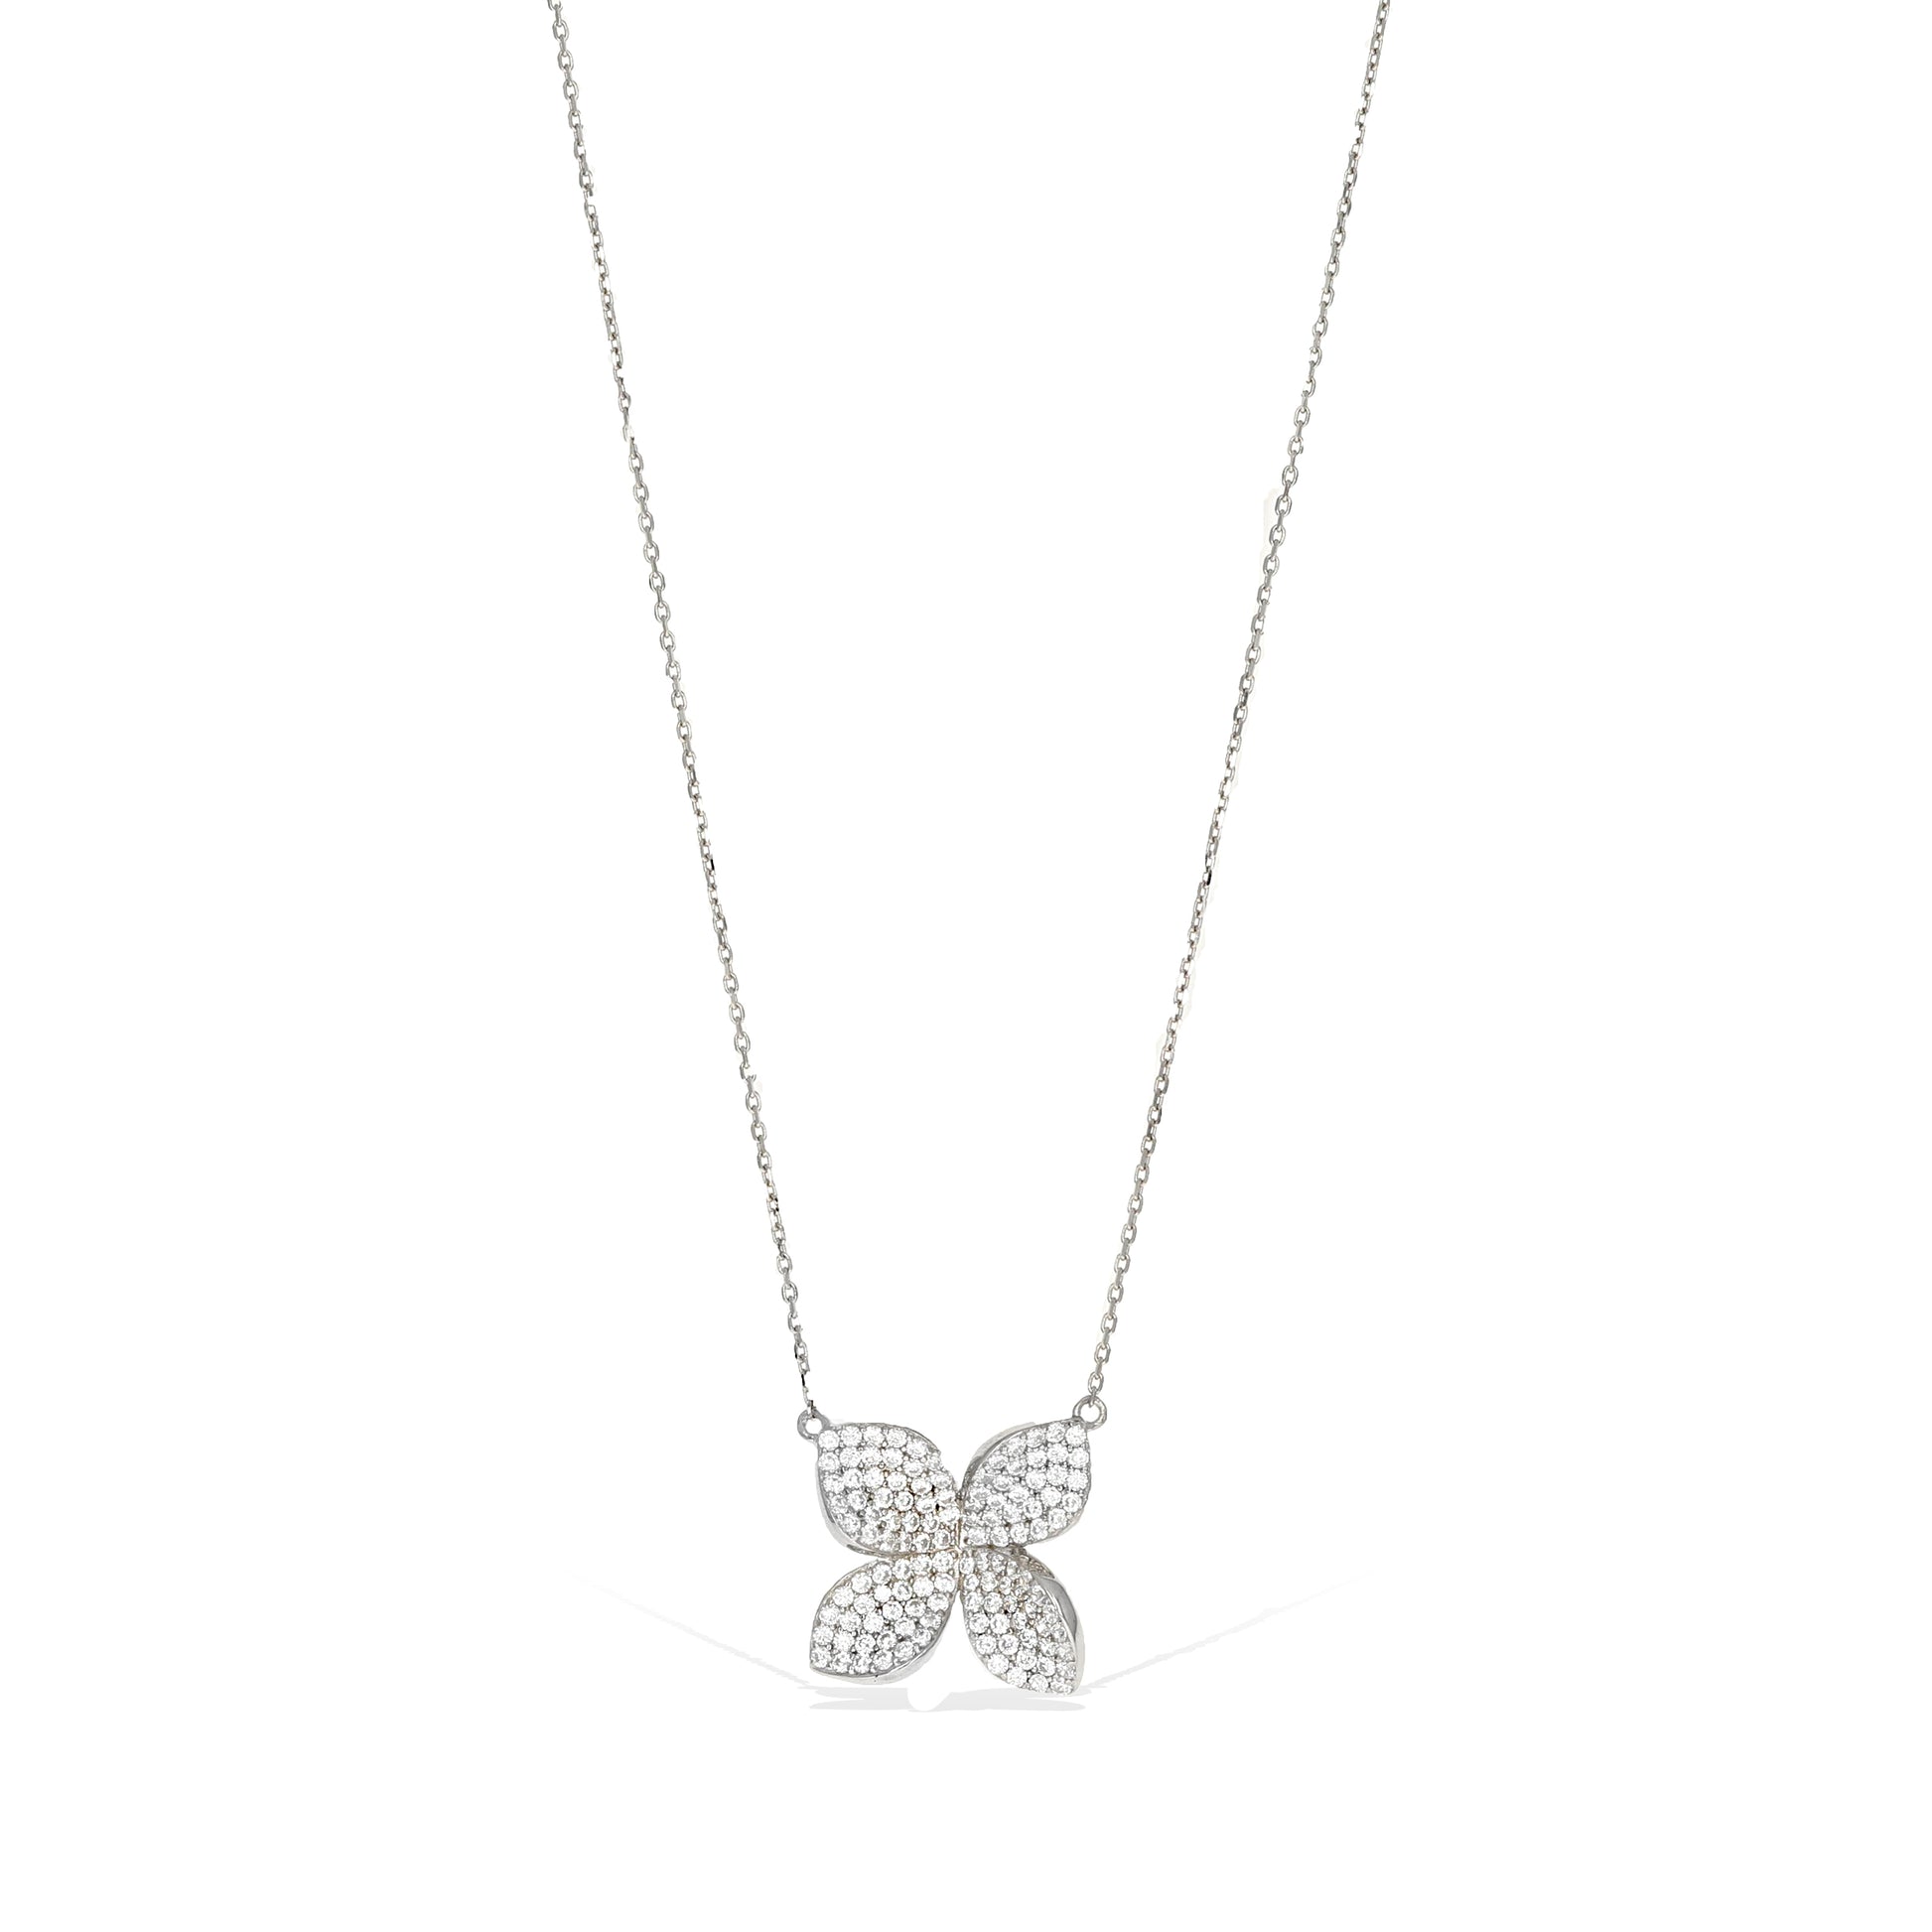 Woman's Cz Floral Gardenia Necklace in sterling silver 18"